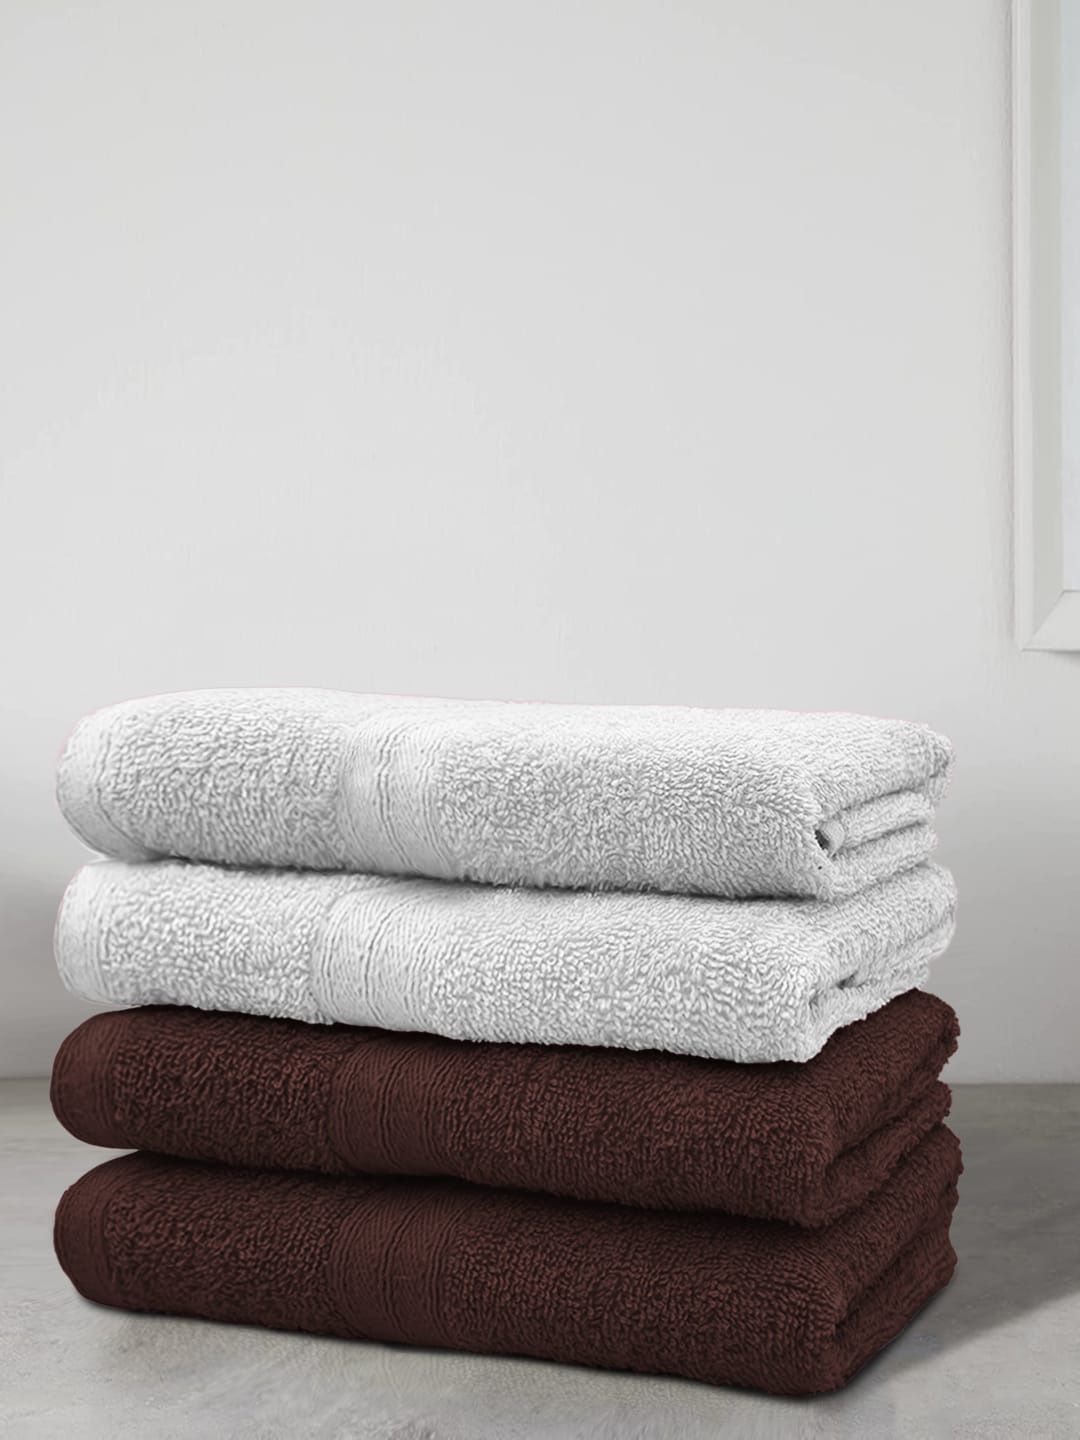 Aura Set Of 4 Solid Cotton 500 GSM Bath Towels Price in India